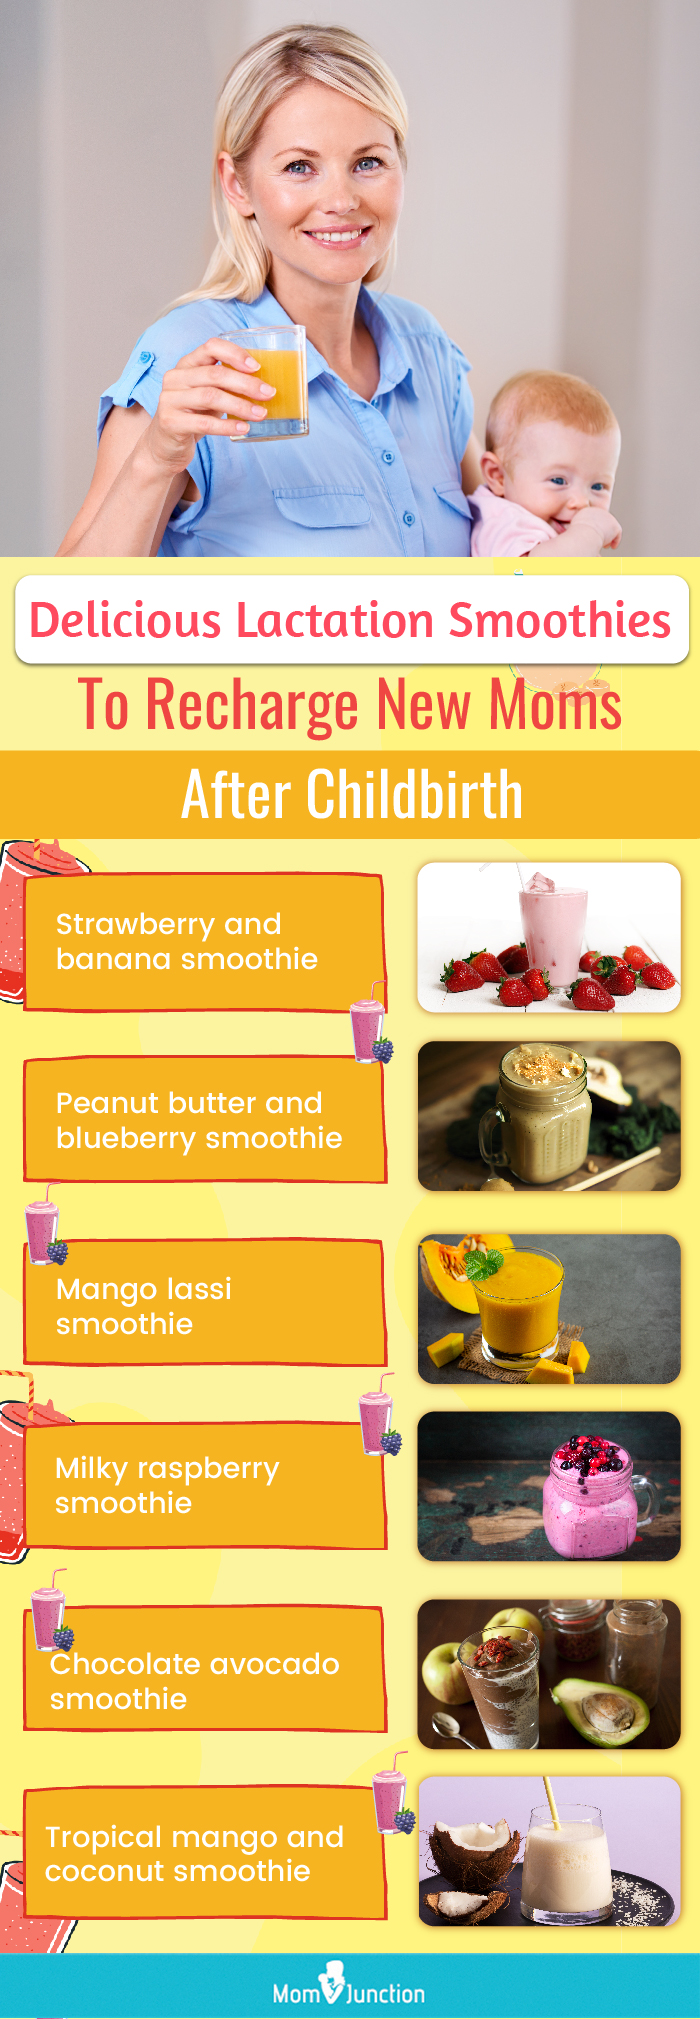 delicious lactation smoothies to recharge new moms after childbirth (infographic)